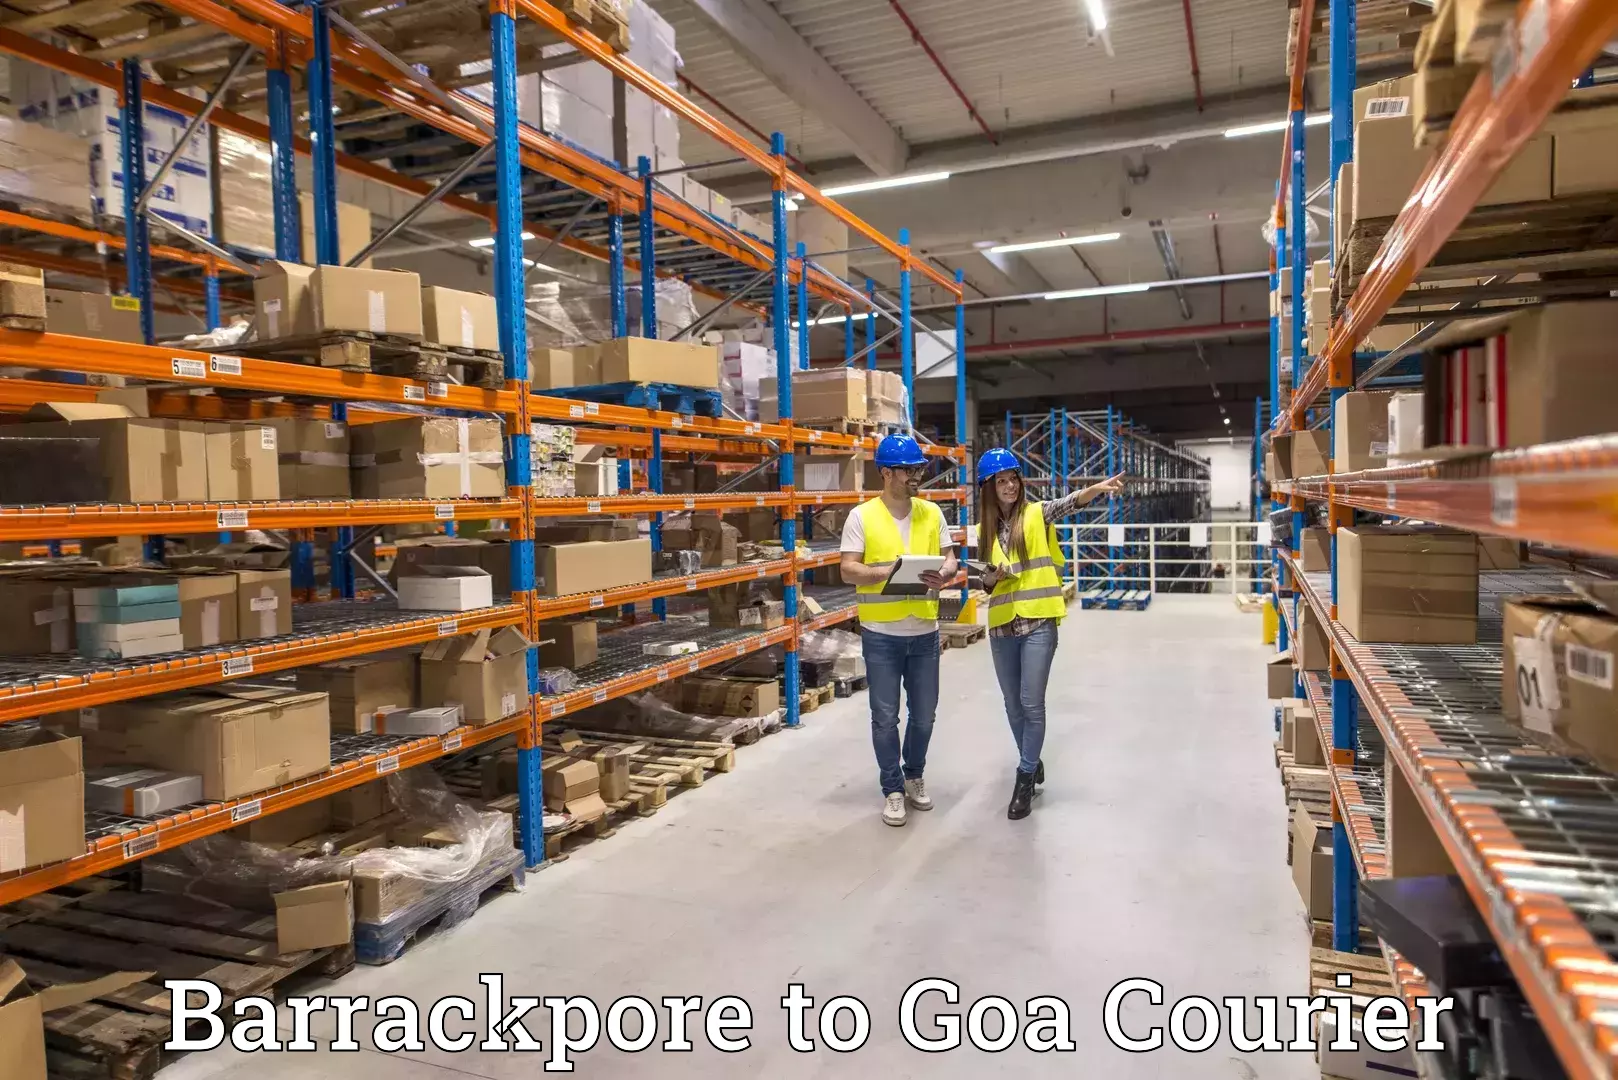 Courier service innovation in Barrackpore to South Goa